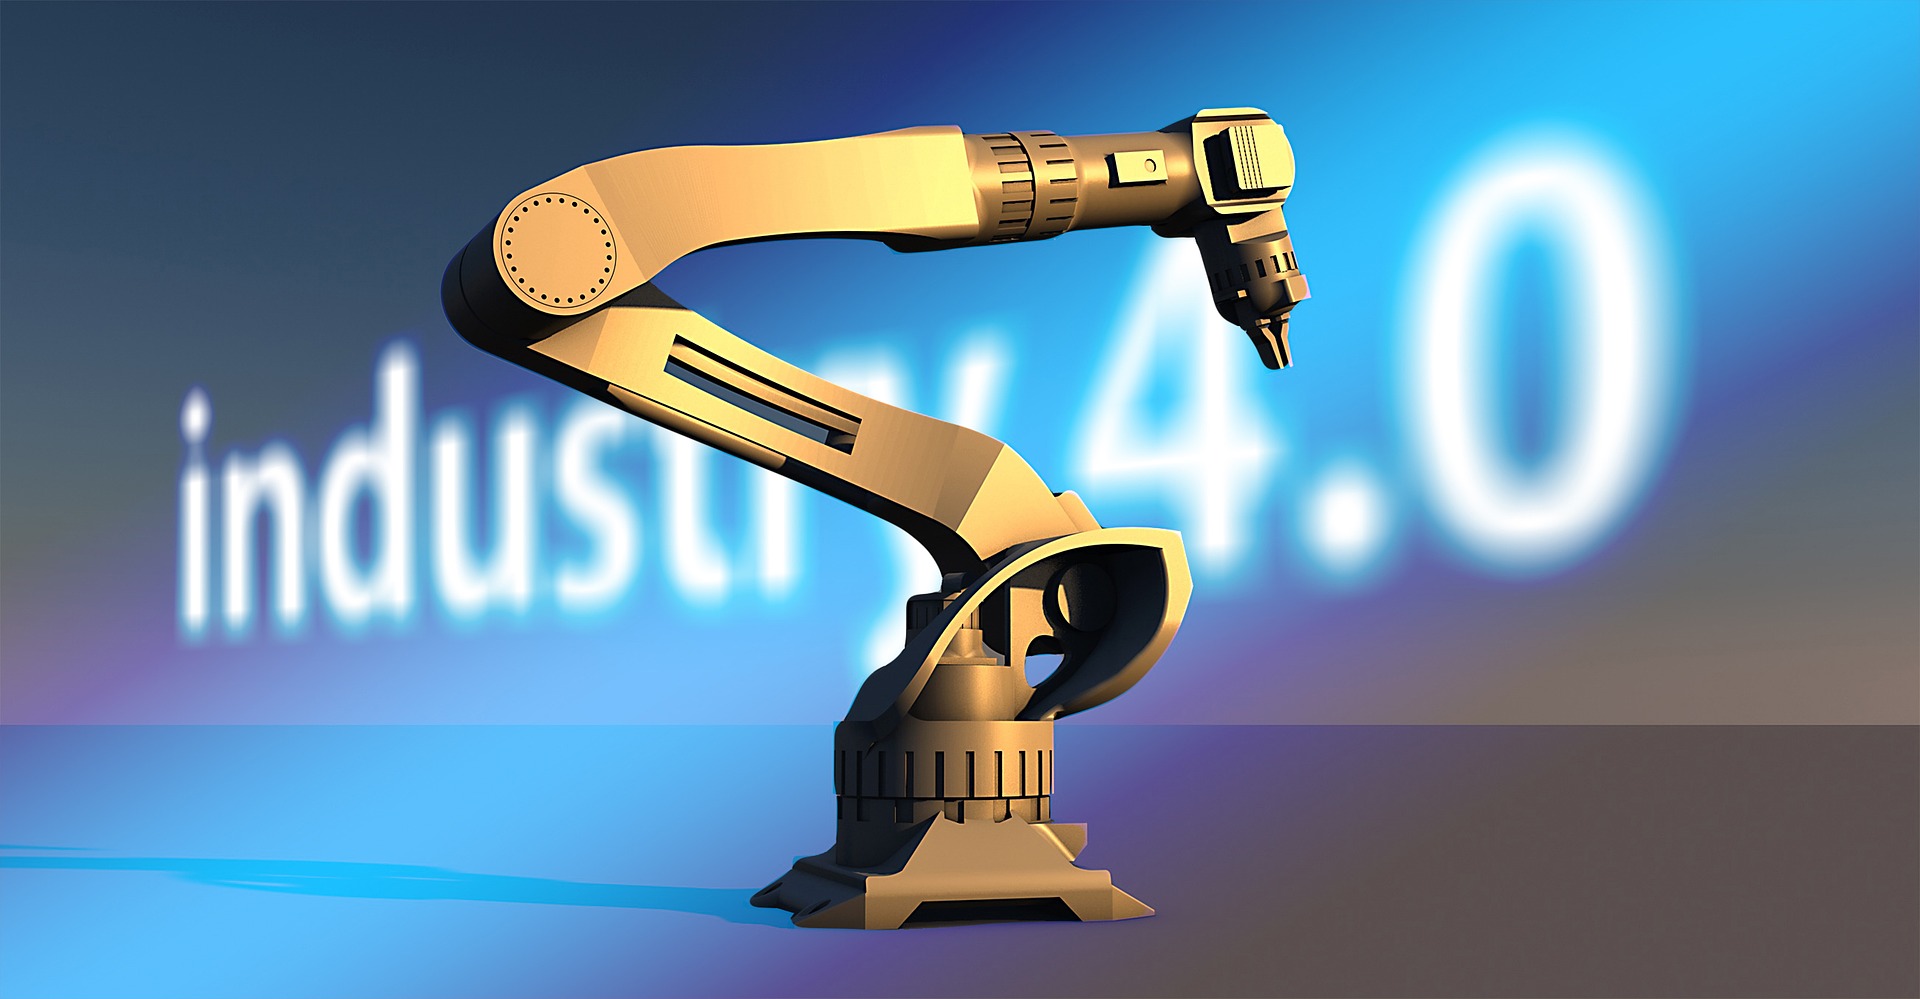 Industry 4.0 is out-of-date. Here's why